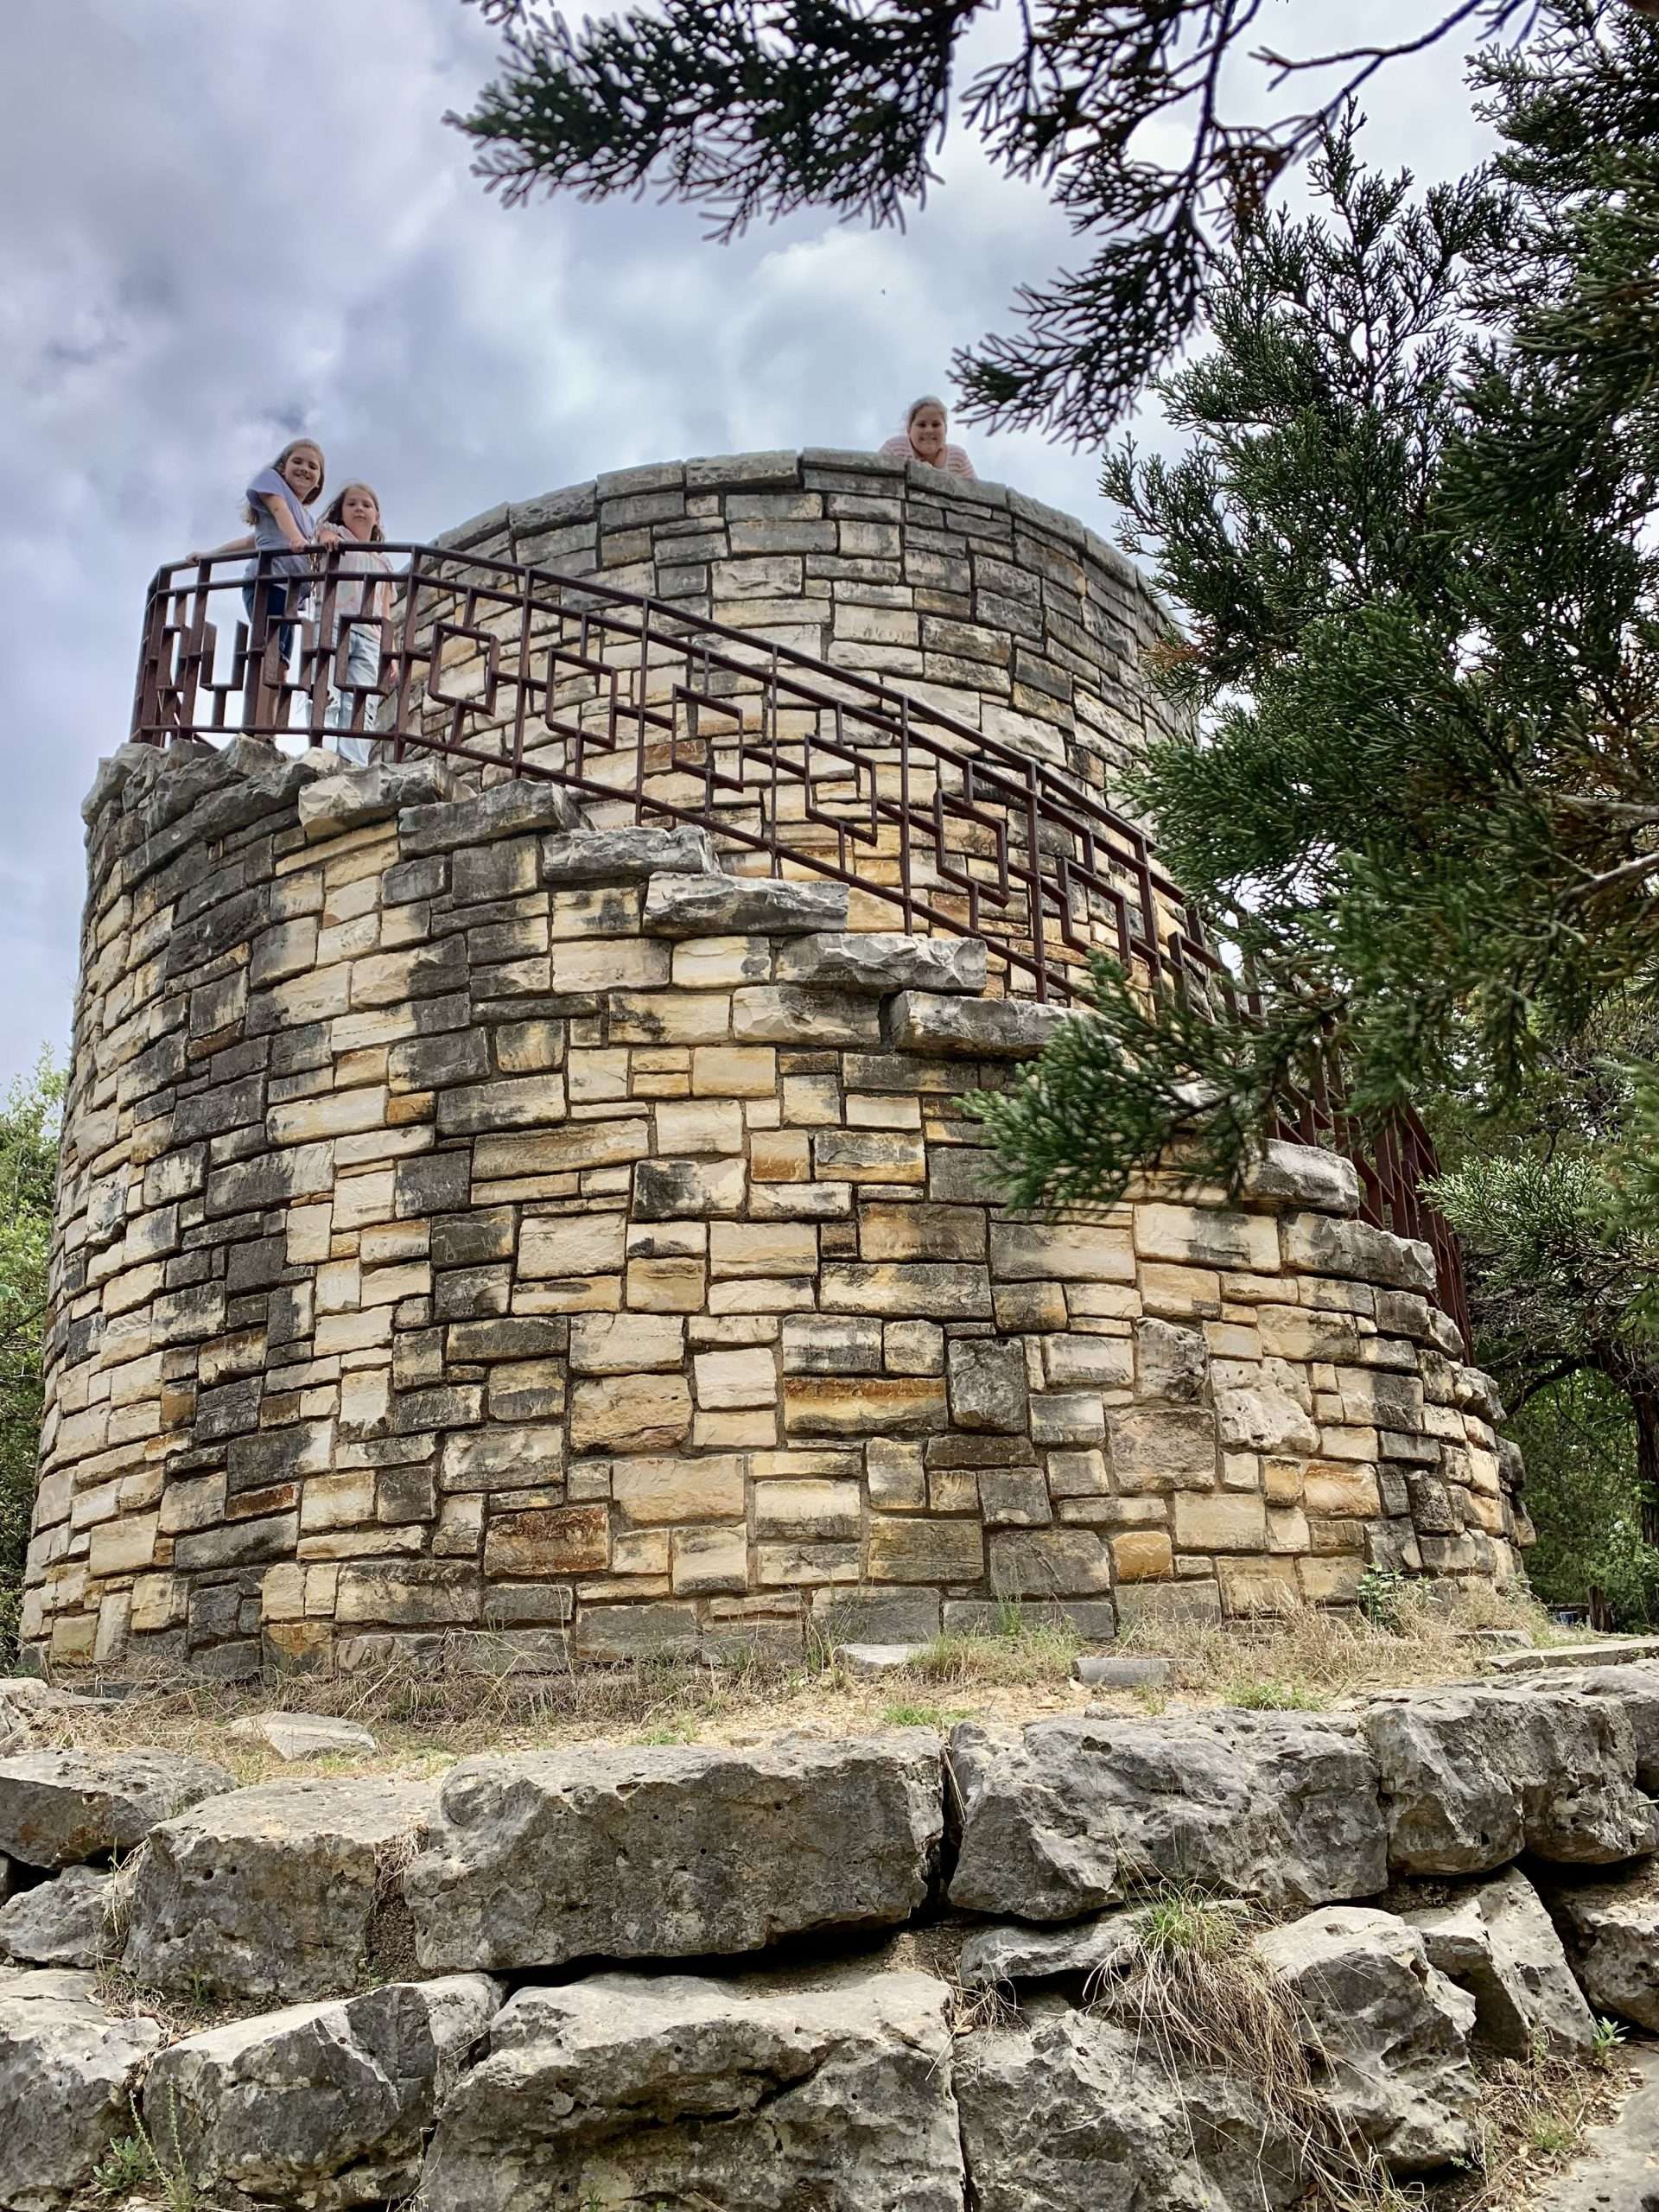 The lookout tower at Mother Neff State Park in Texas.